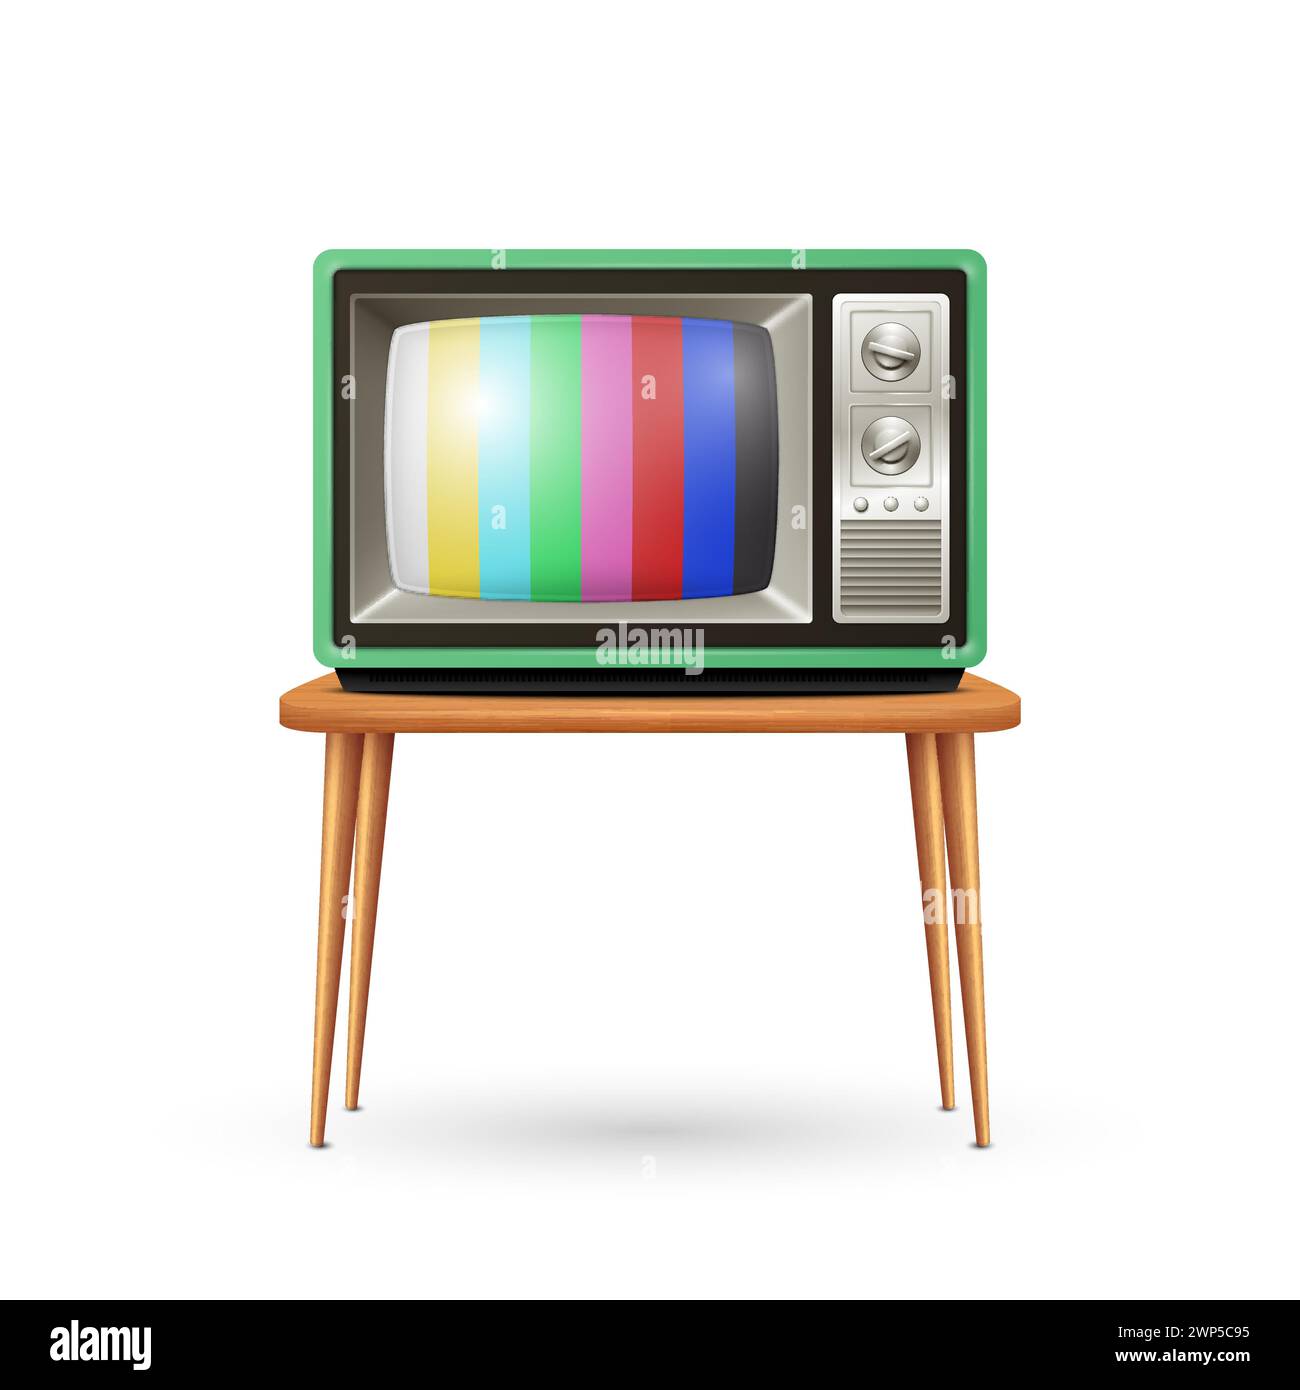 Vector 3d Realistic Green Retro TV Set on the Table, Isolated. Vintage TV Design Template for Home Interior Design Concept. Classic Retro TV Receiver Stock Vector